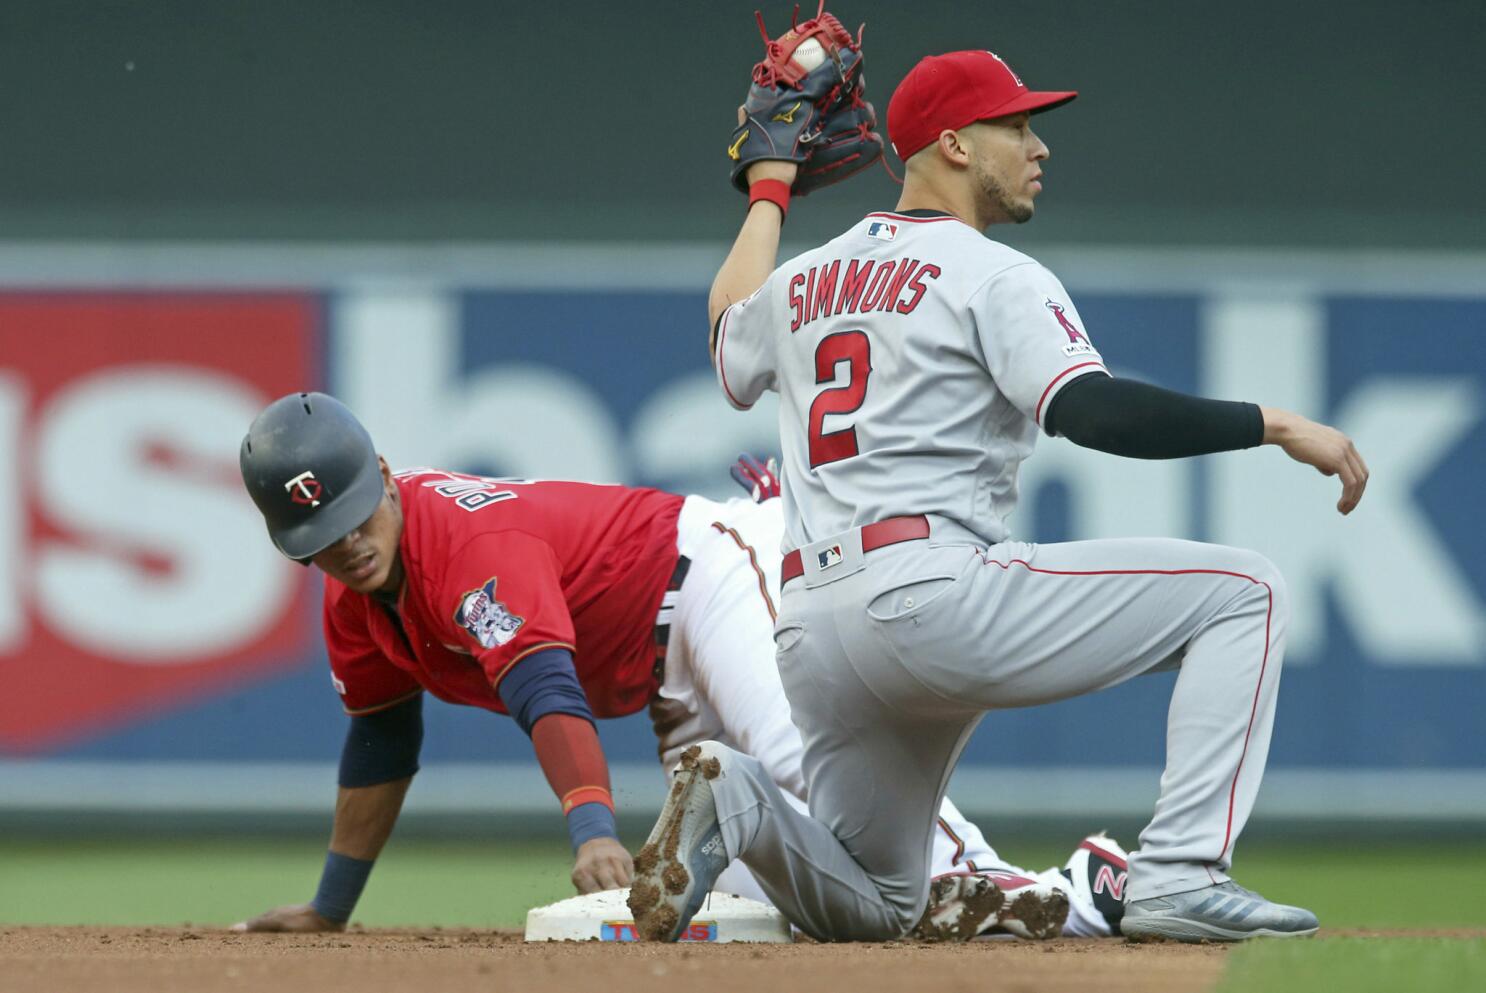 Andrelton Simmons: Good things are Happening for the Angels Now